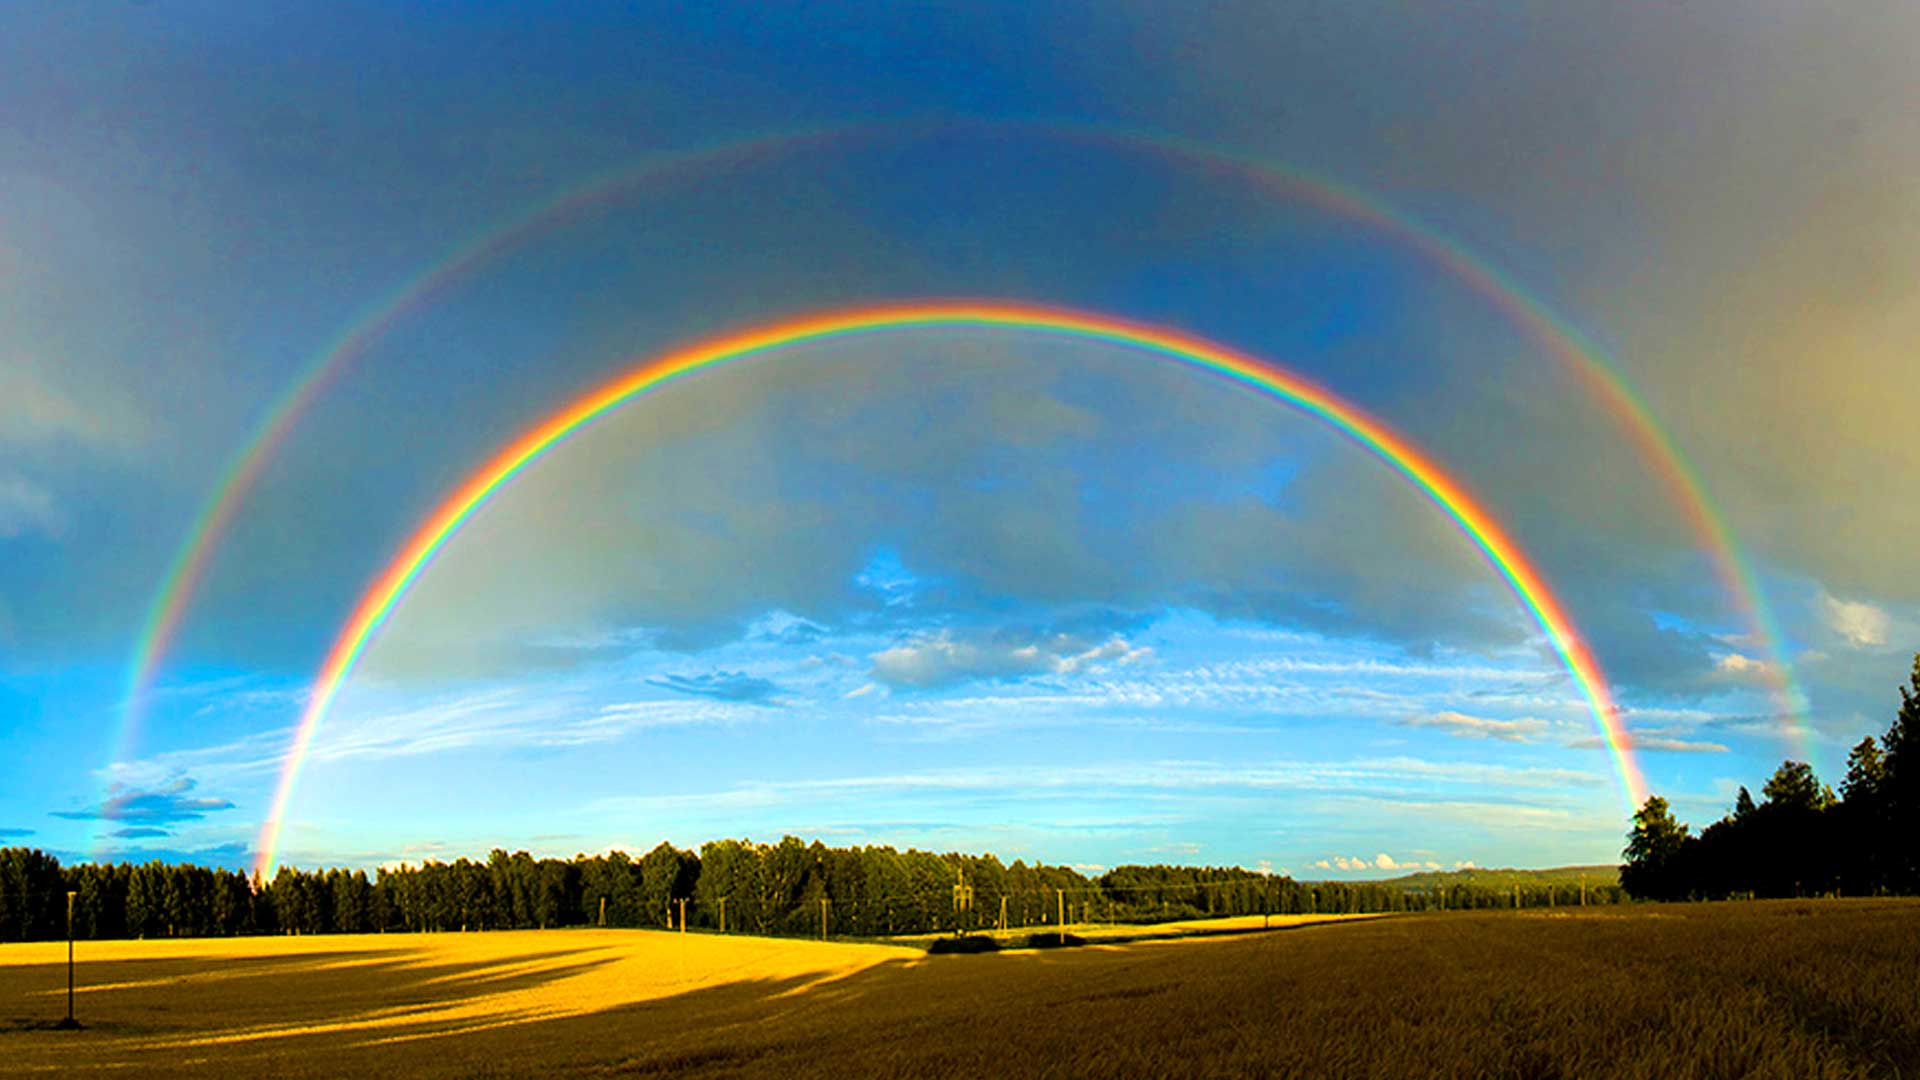 The Double Rainbow Viral Video - It's So Intense!